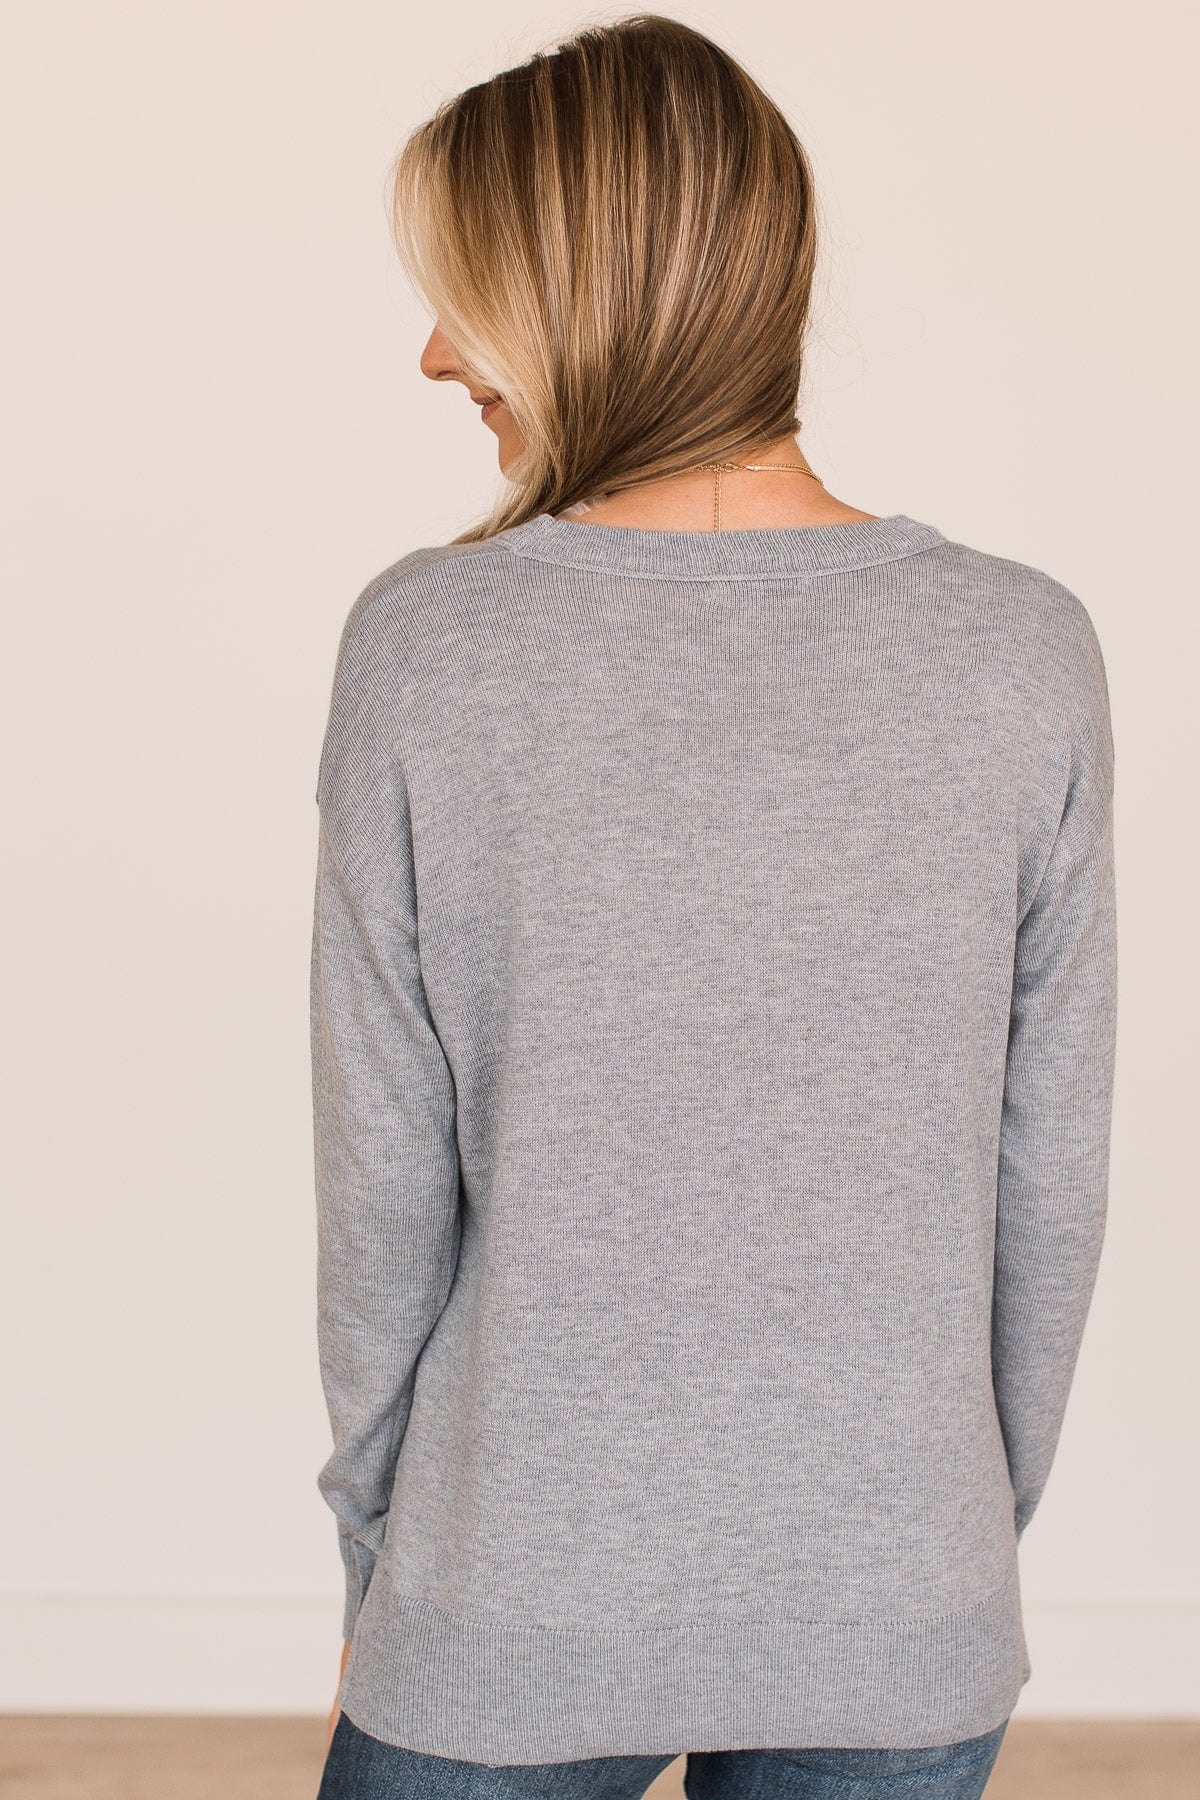 Soothes The Soul Knit Top- Heather Grey